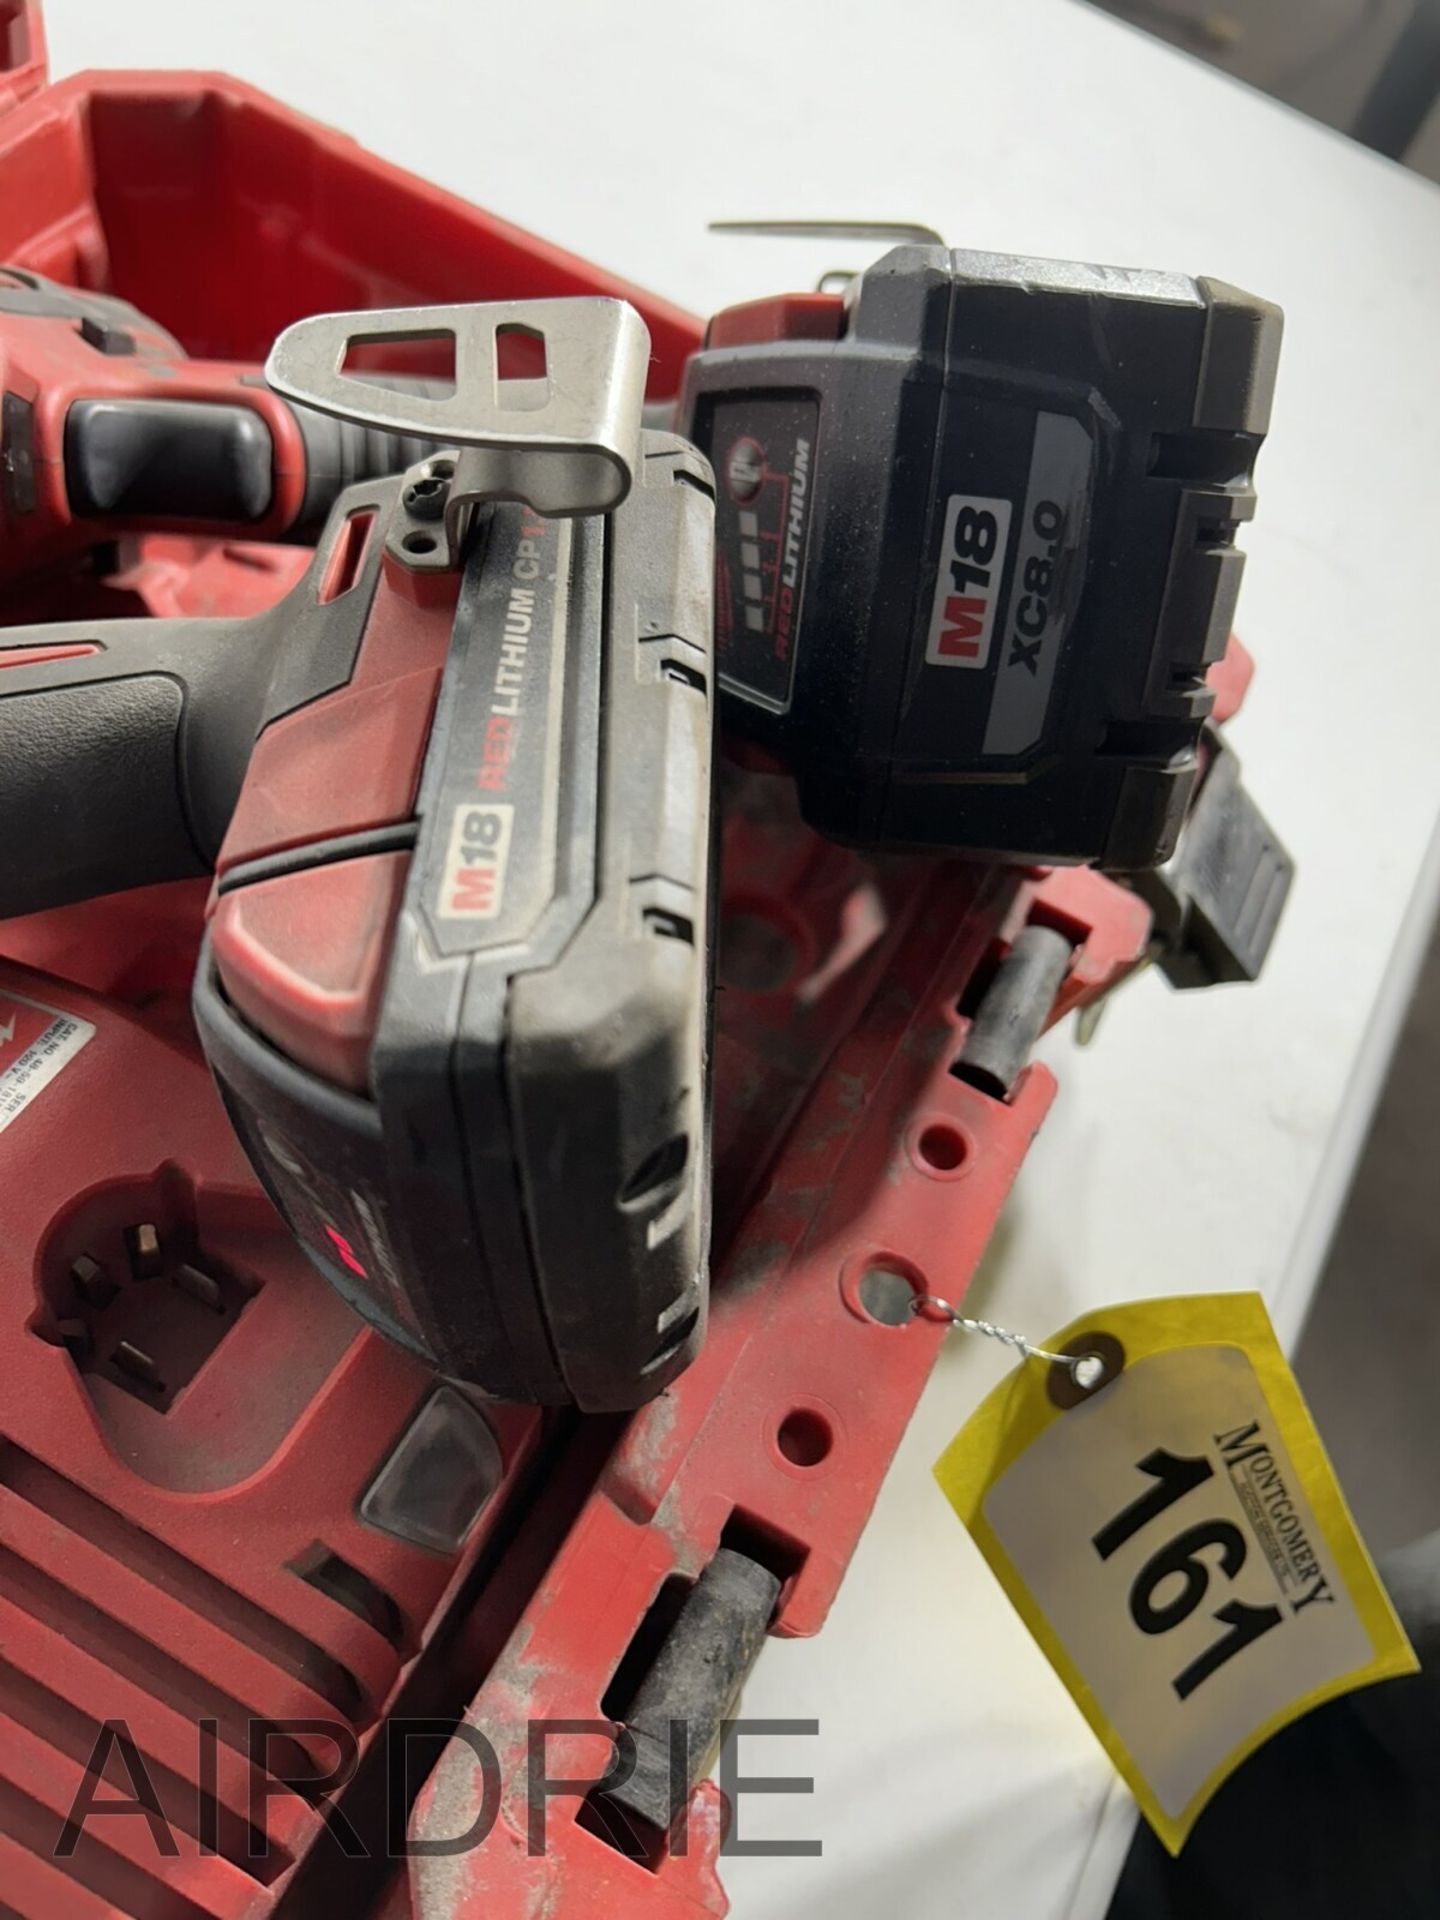 *OFFSITE* MILWAUKEE CORDLESS DRILL AND IMPACT DRIVER KIT W/ BATTERY AND CHARGER - Image 4 of 6